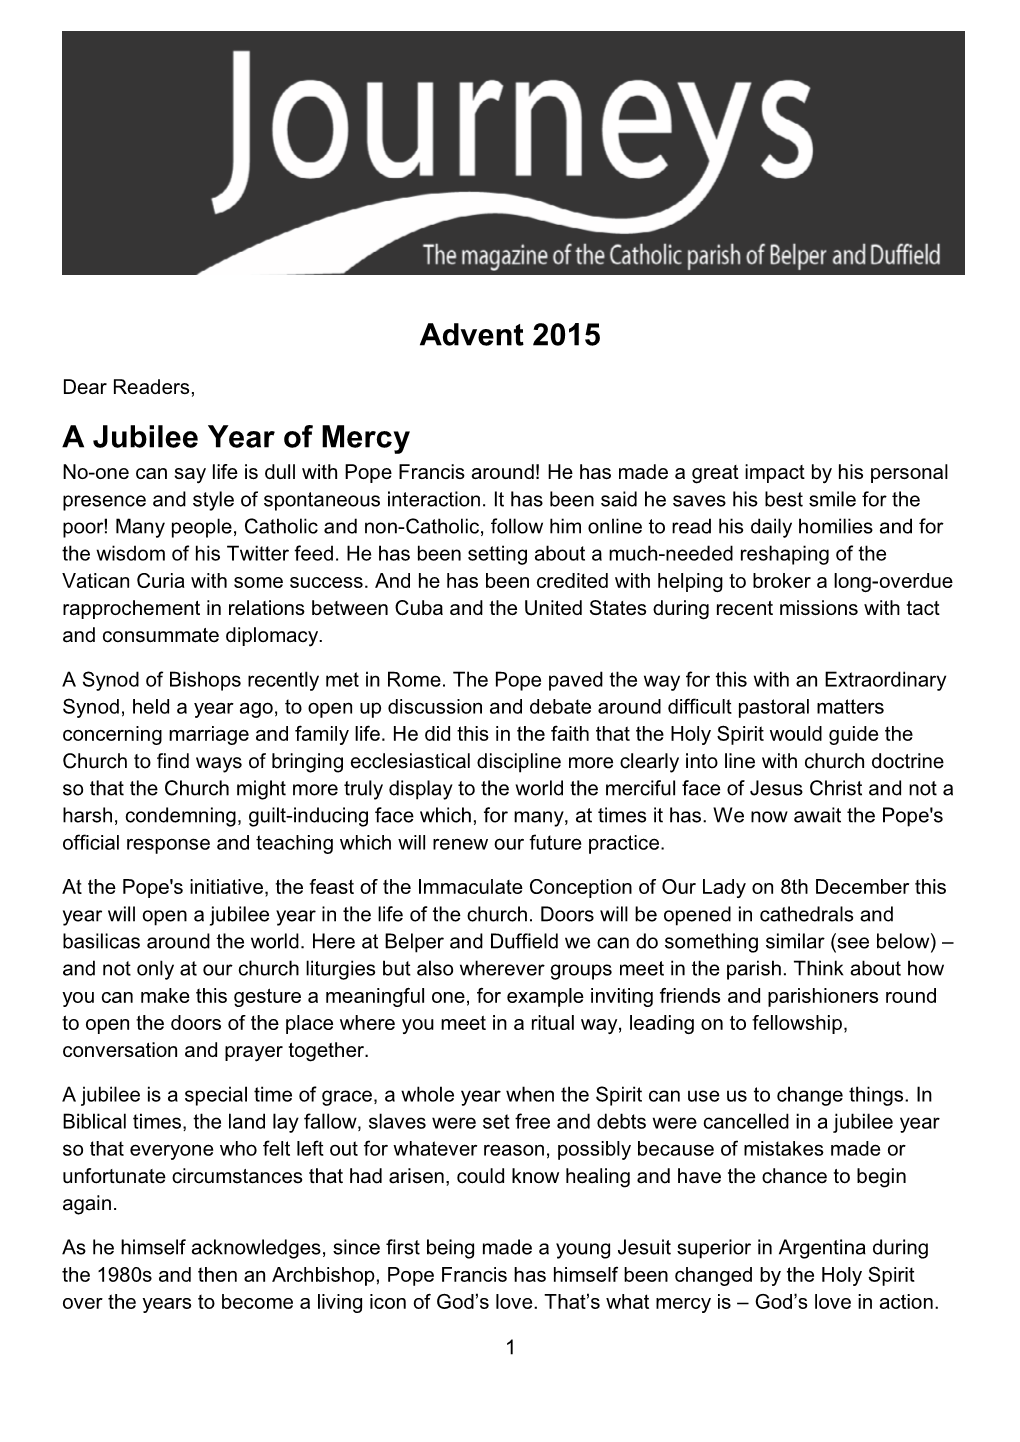 Advent 2015 a Jubilee Year of Mercy